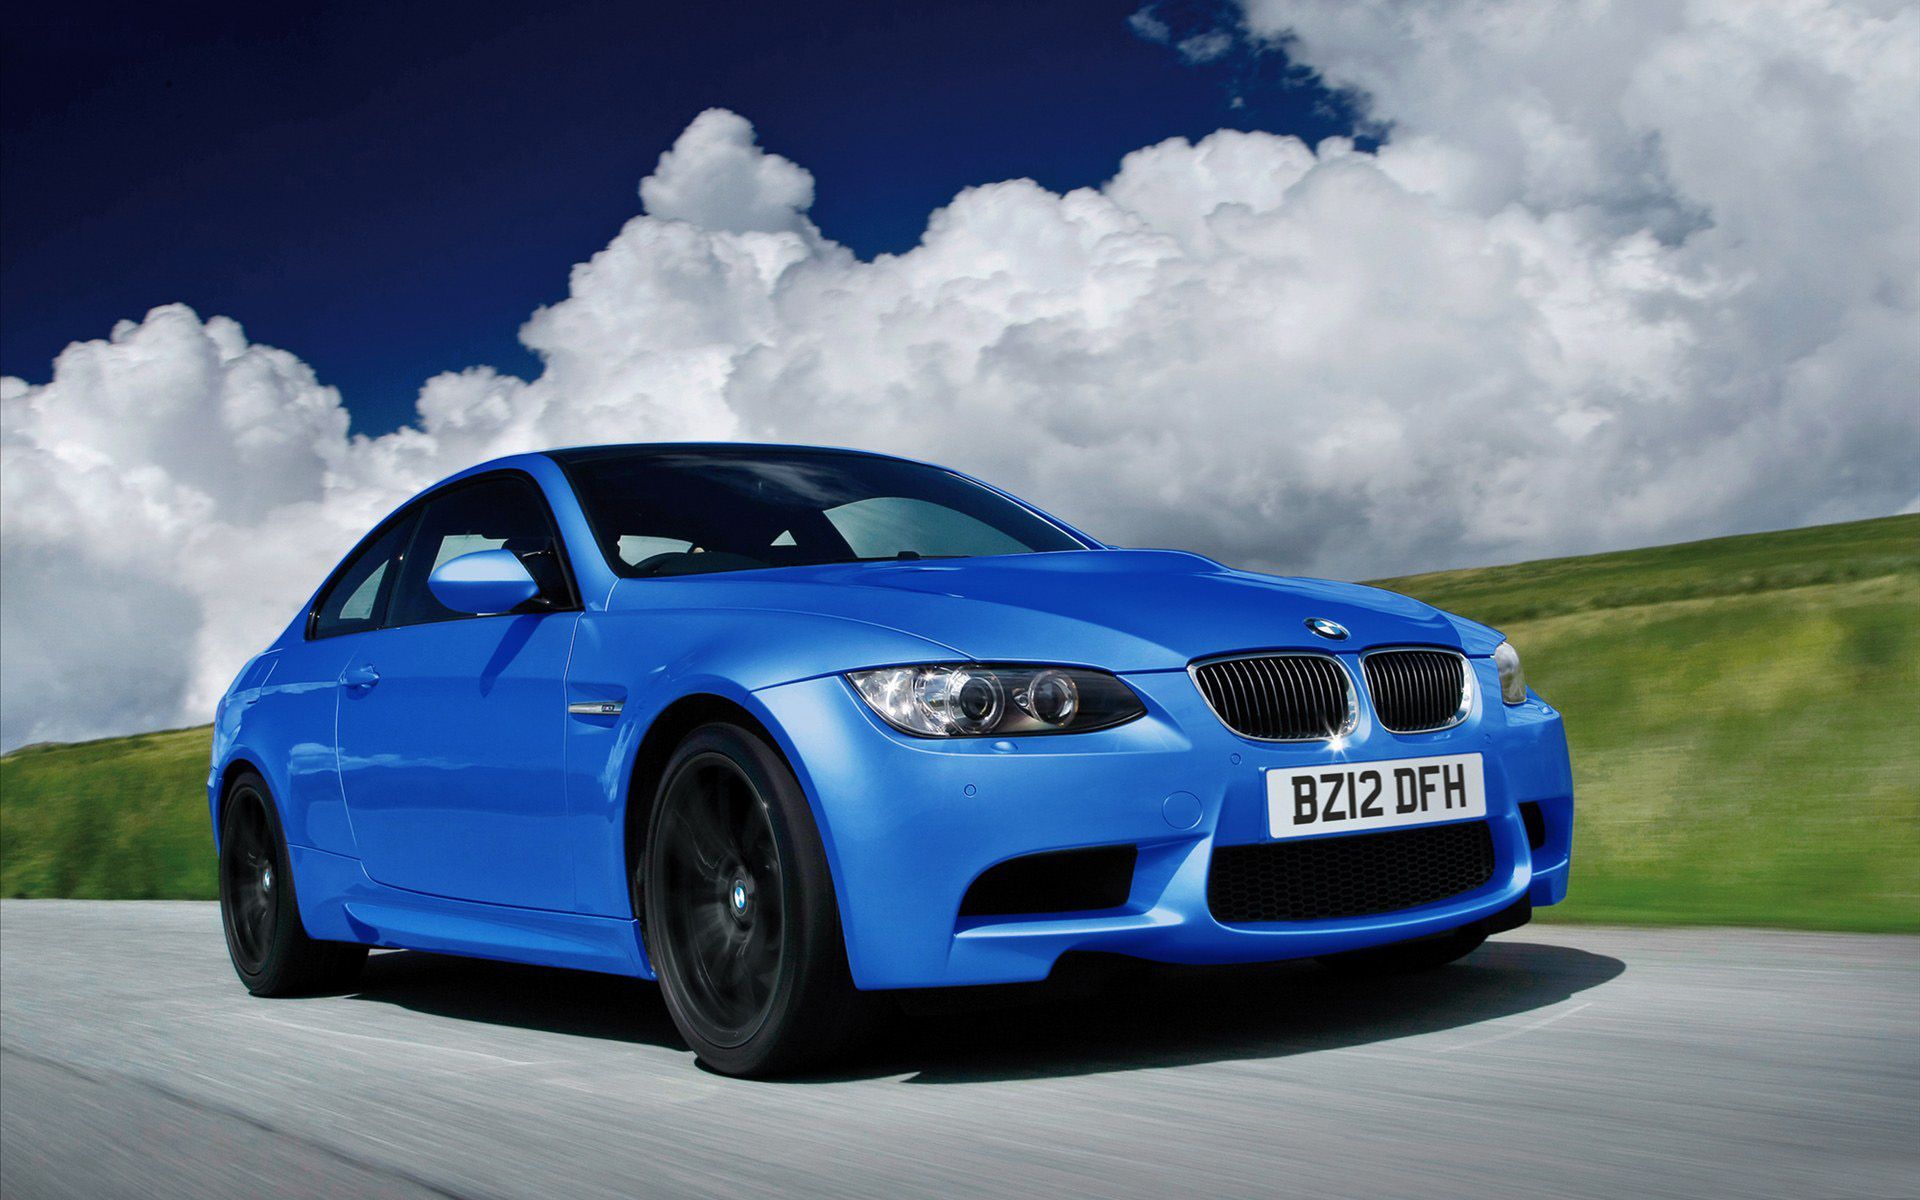 BMW M3 Limited Edition 2013 Wallpaper | HD Car Wallpapers